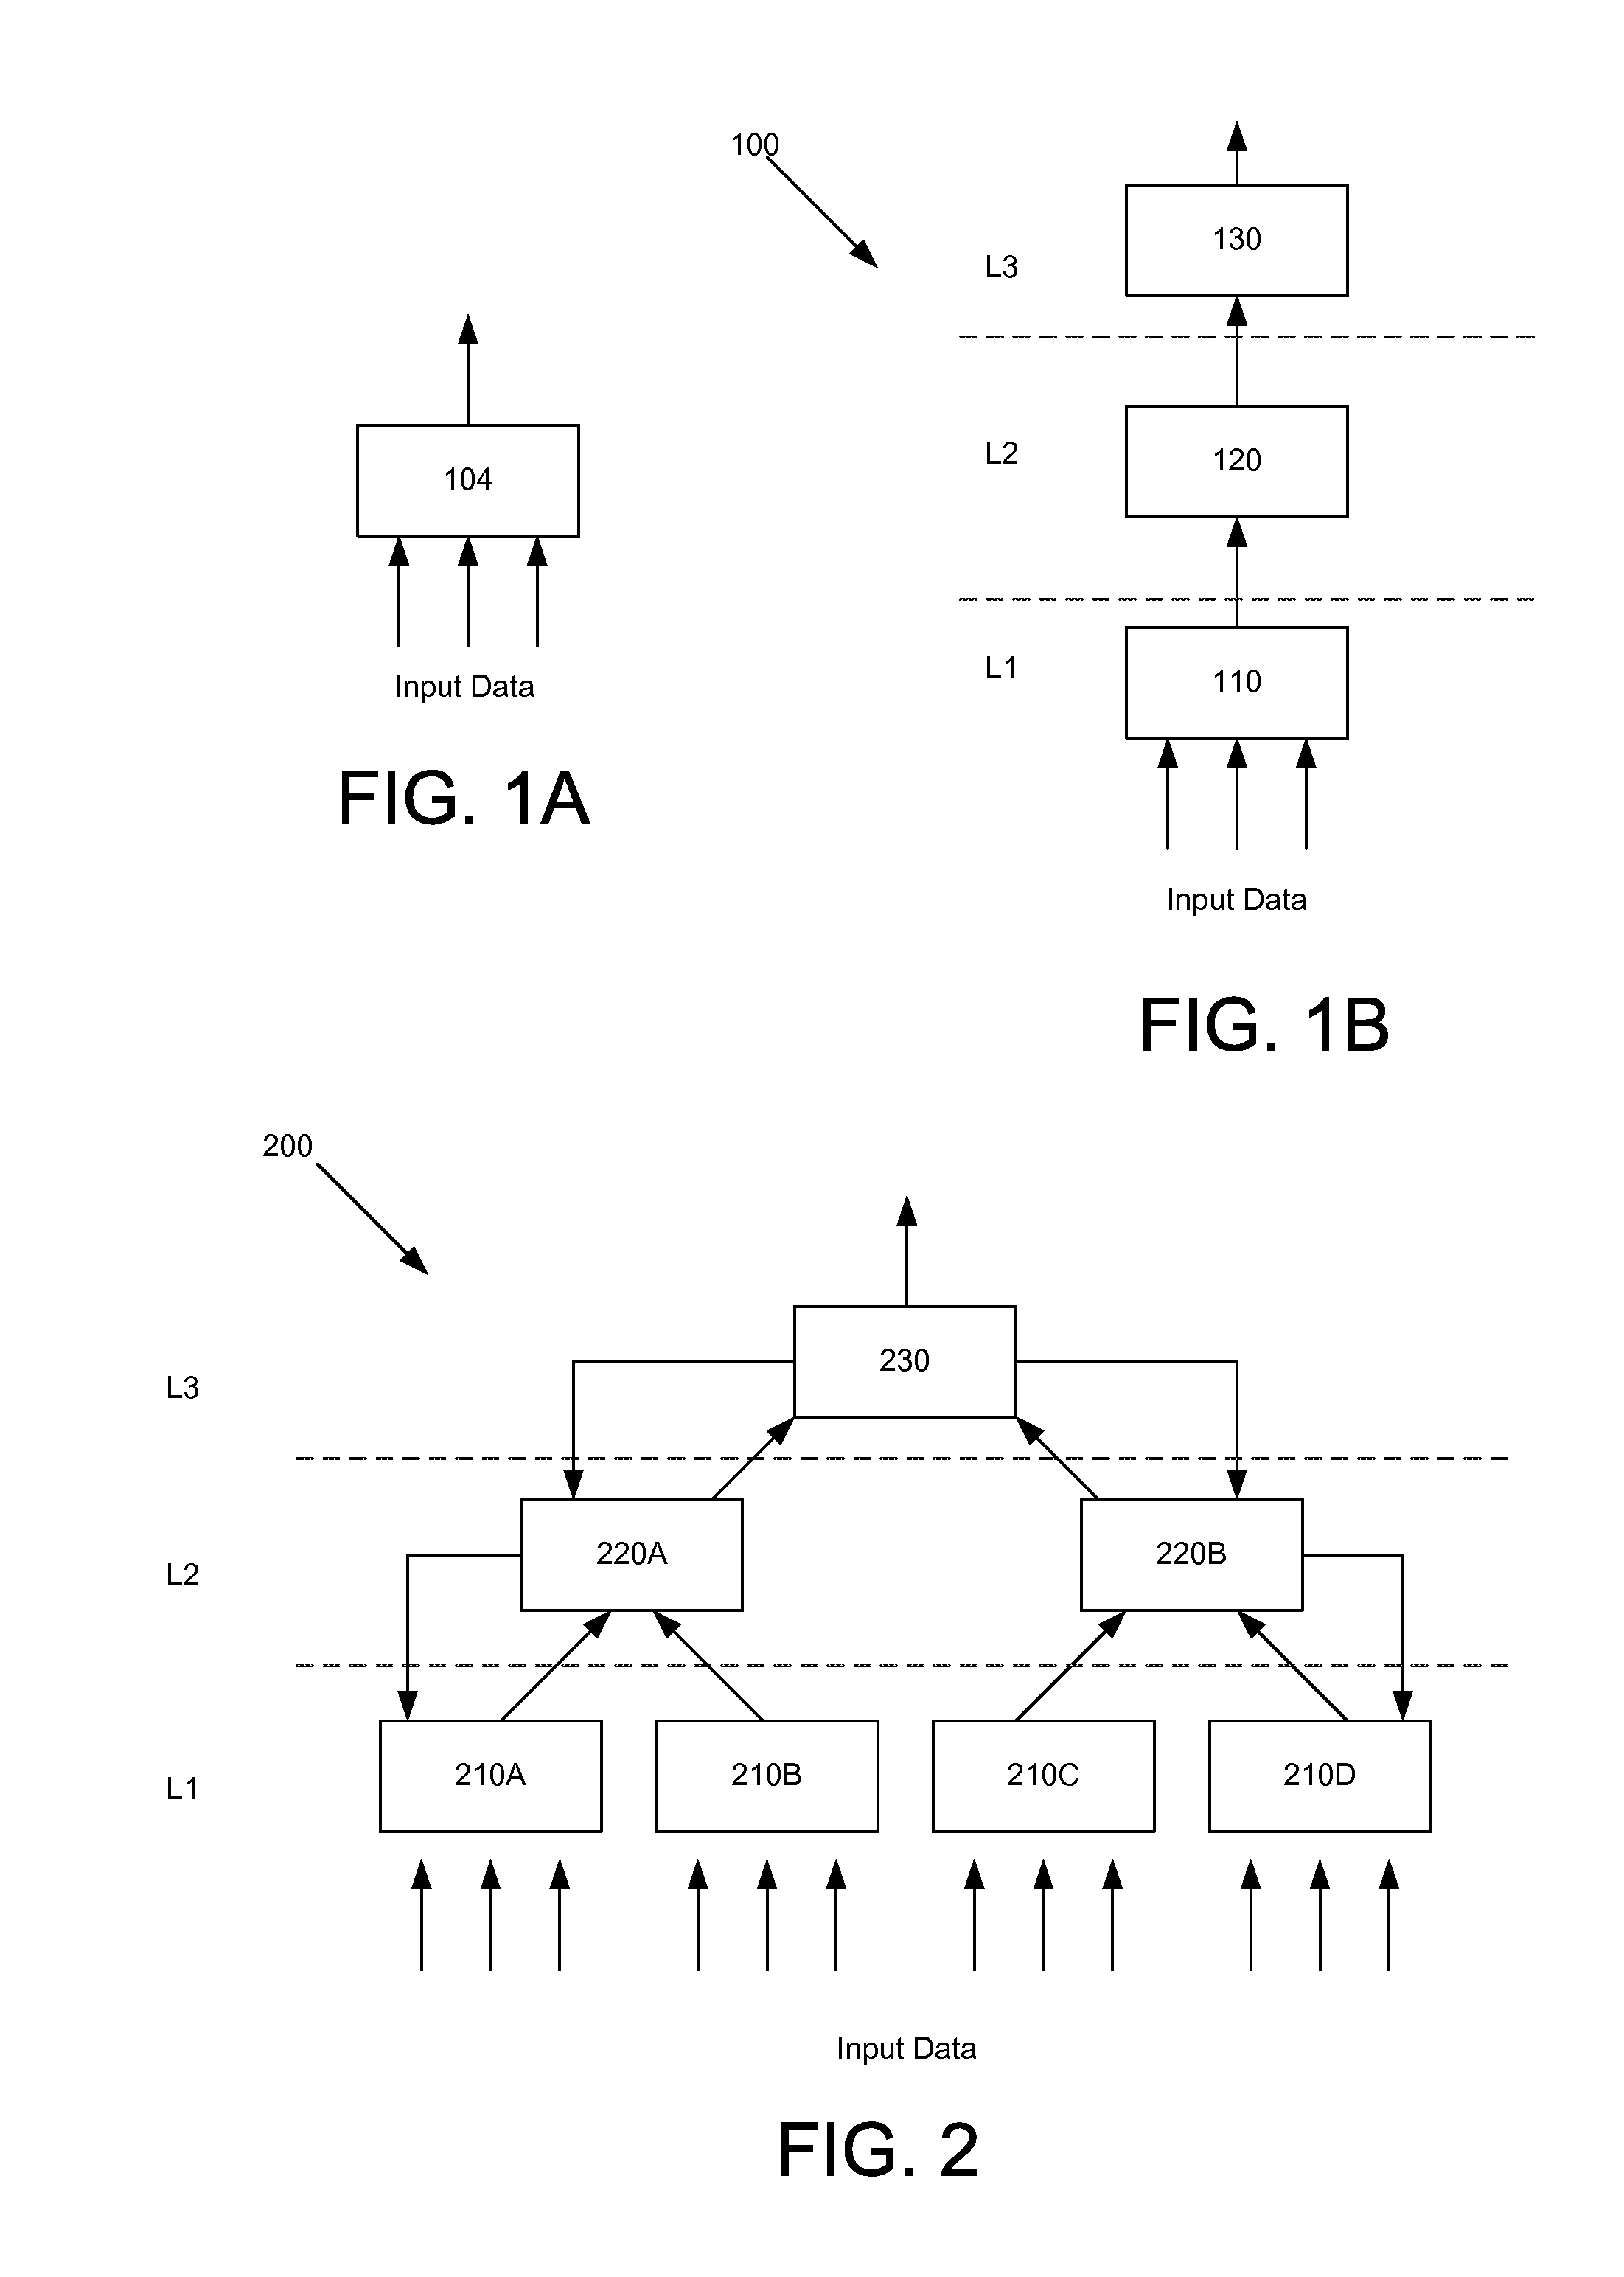 Anomaly detection in spatial and temporal memory system